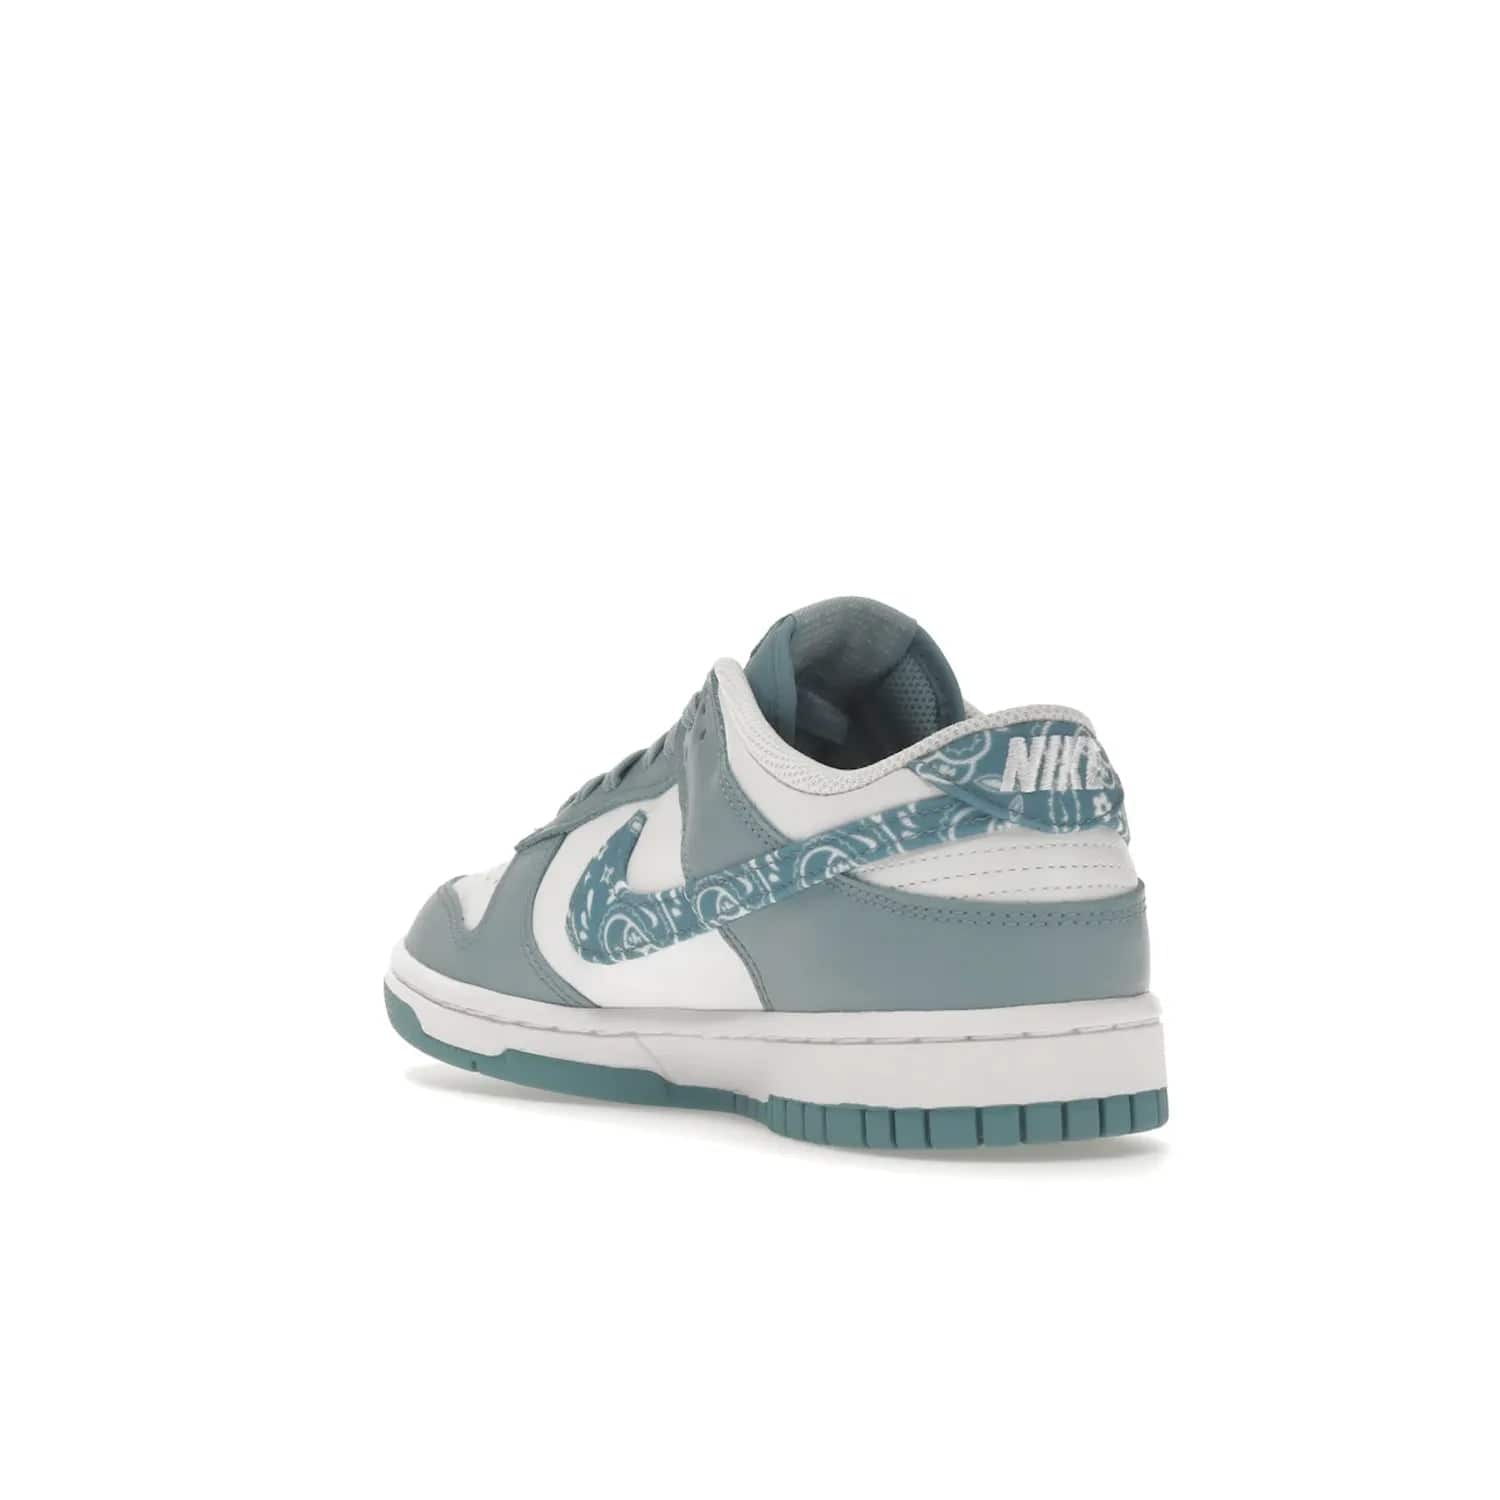 Nike Dunk Low Essential Paisley Pack Worn Blue (Women's) - Image 25 - Only at www.BallersClubKickz.com - Get the Nike Dunk Low Essential Paisley Pack Worn Blue (Women's) for style and comfort. White leather construction, light blue leather overlays, canvas Swooshes and matching heel tabs offer a rich blue hue. Finished by a white and light blue sole, this classic Nike Dunk is the perfect addition to any wardrobe. Released in March 2022.